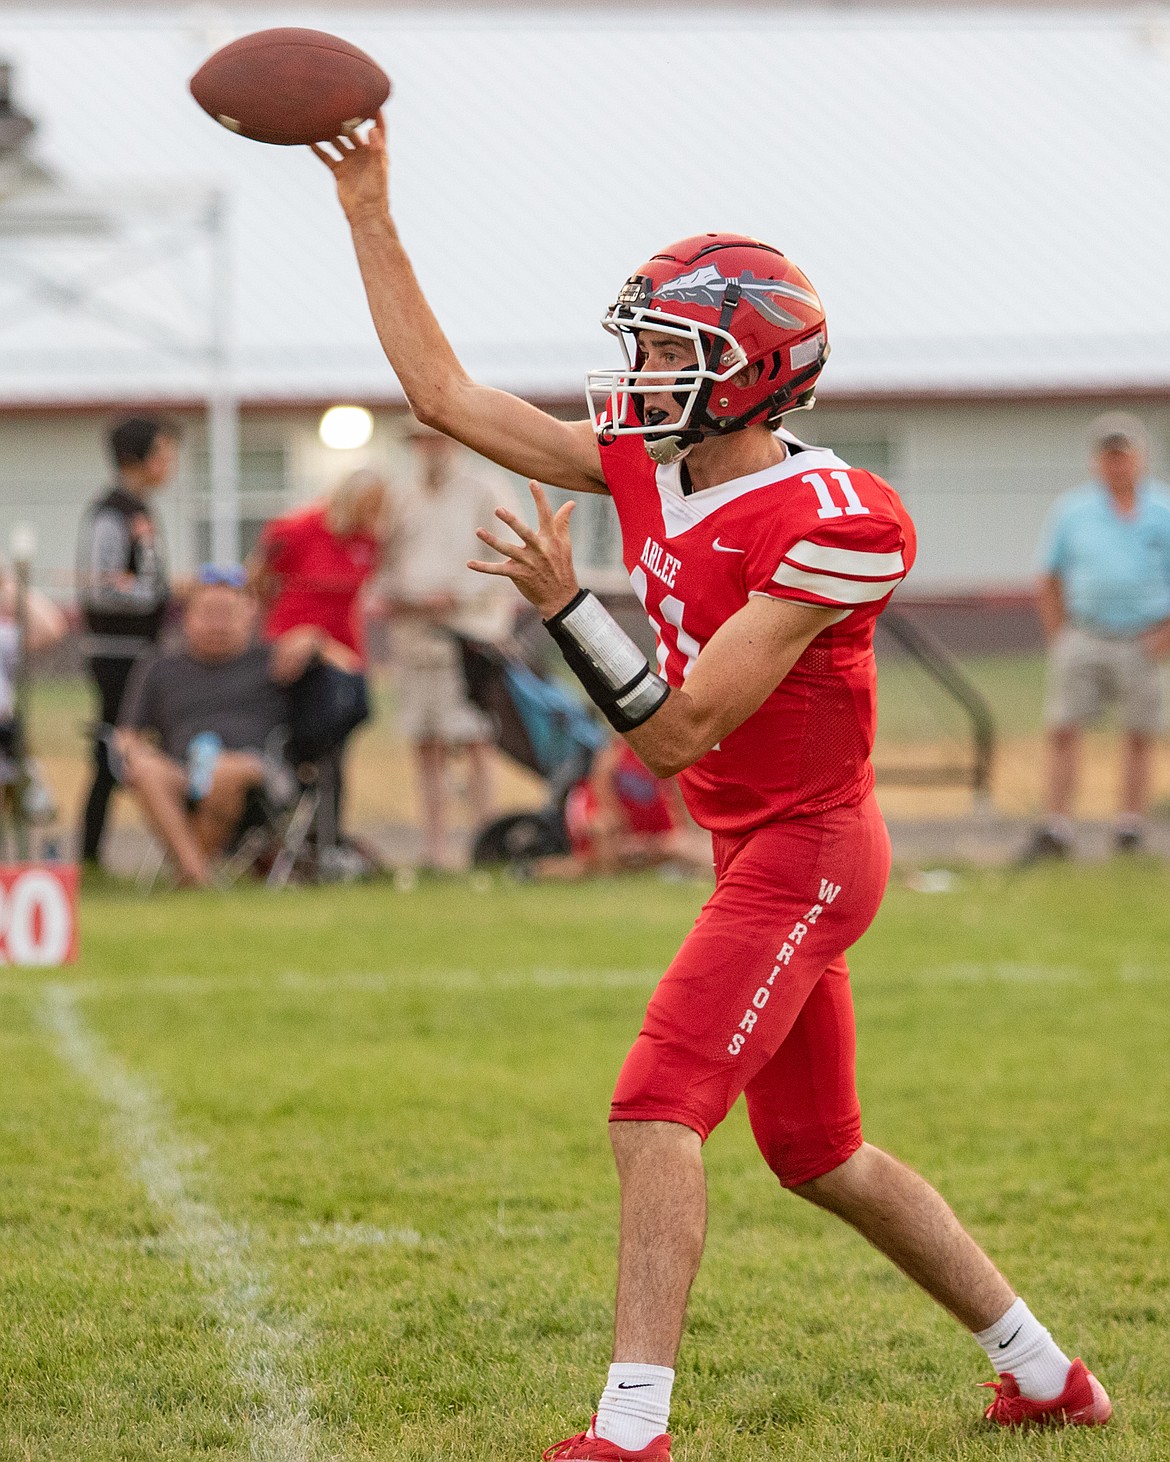 Arlee Warrior quarterback Kendall O'Neill completes a pass to an open receiver during the second quarter of Friday evening’s home game against the Charlo Vikings. (Rob Zolman/Lake County Leader)